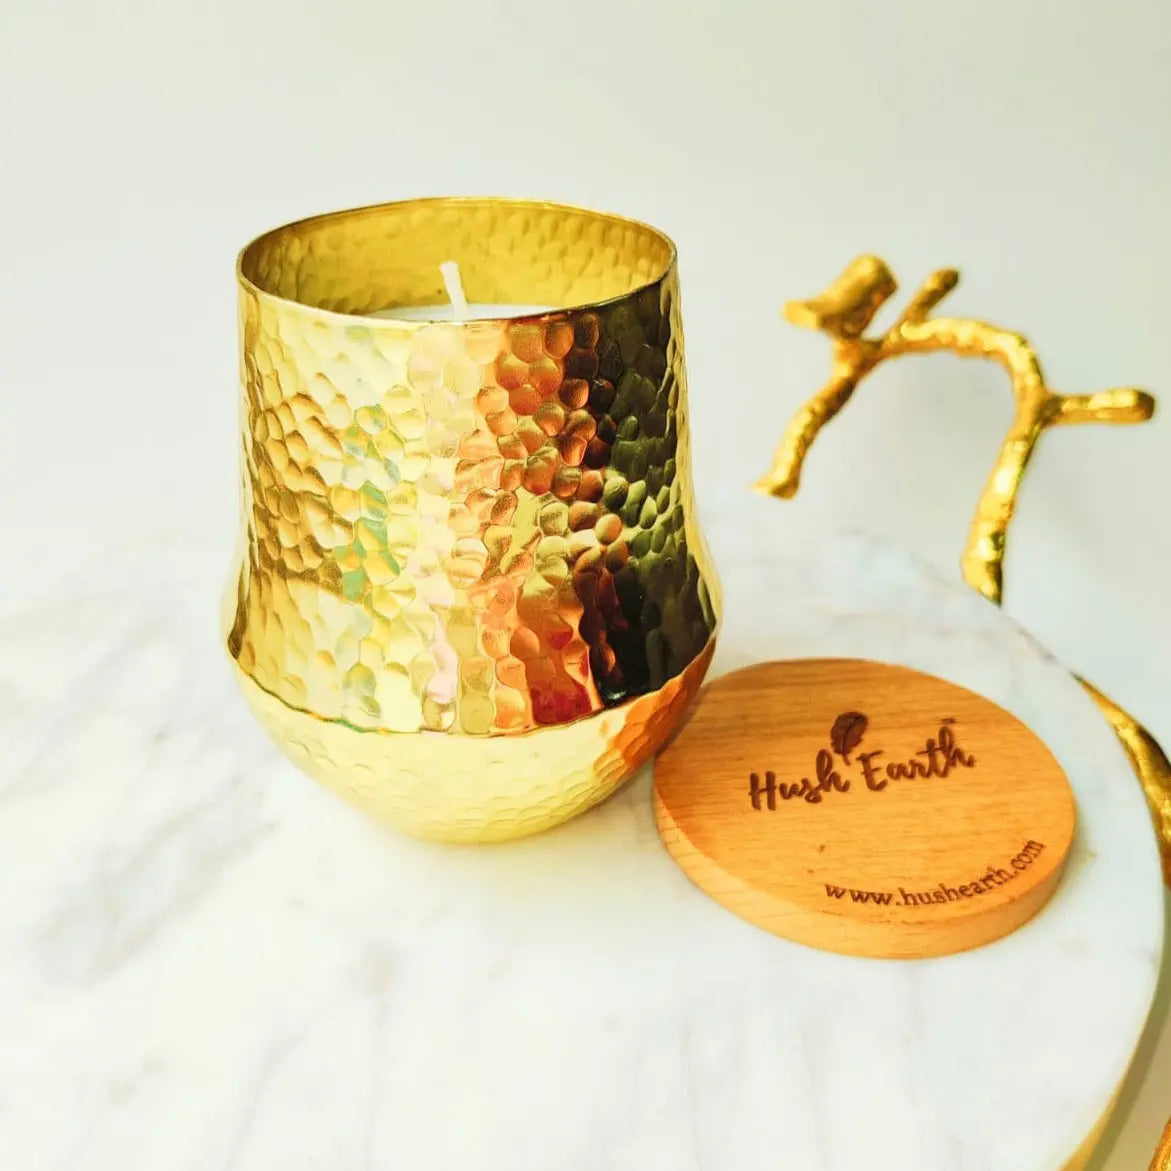 Subtle | Hint of Lavender - Hush Earth Handcrafted Single Wick Metal Jar Candle-Hush Earth